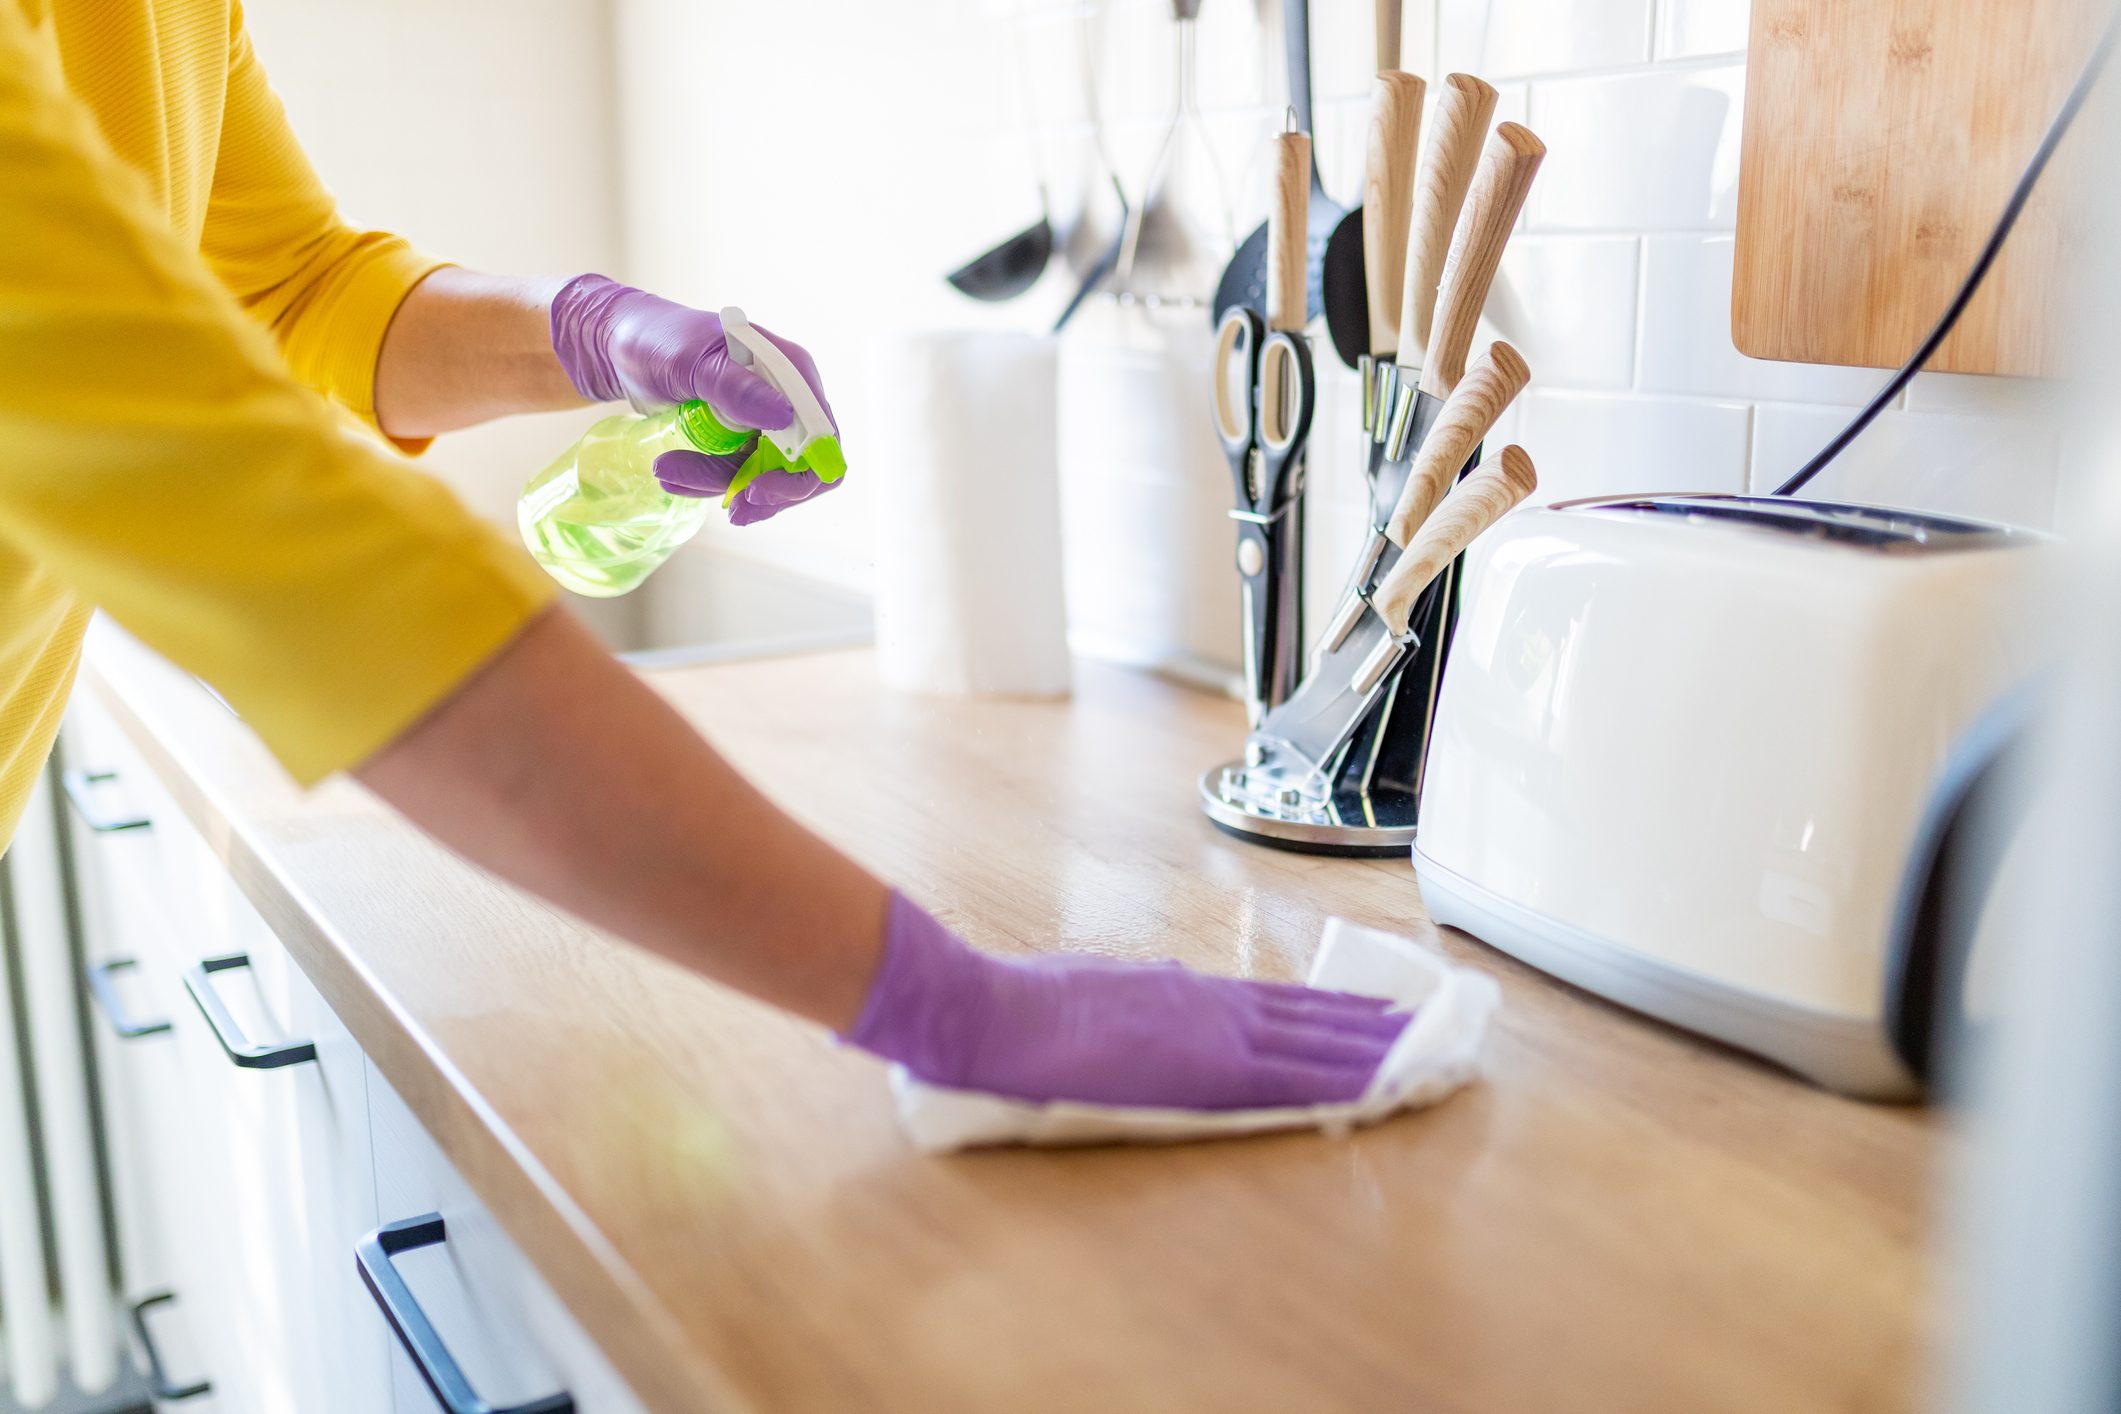 A Step-by-Step Kitchen Cleaning Checklist